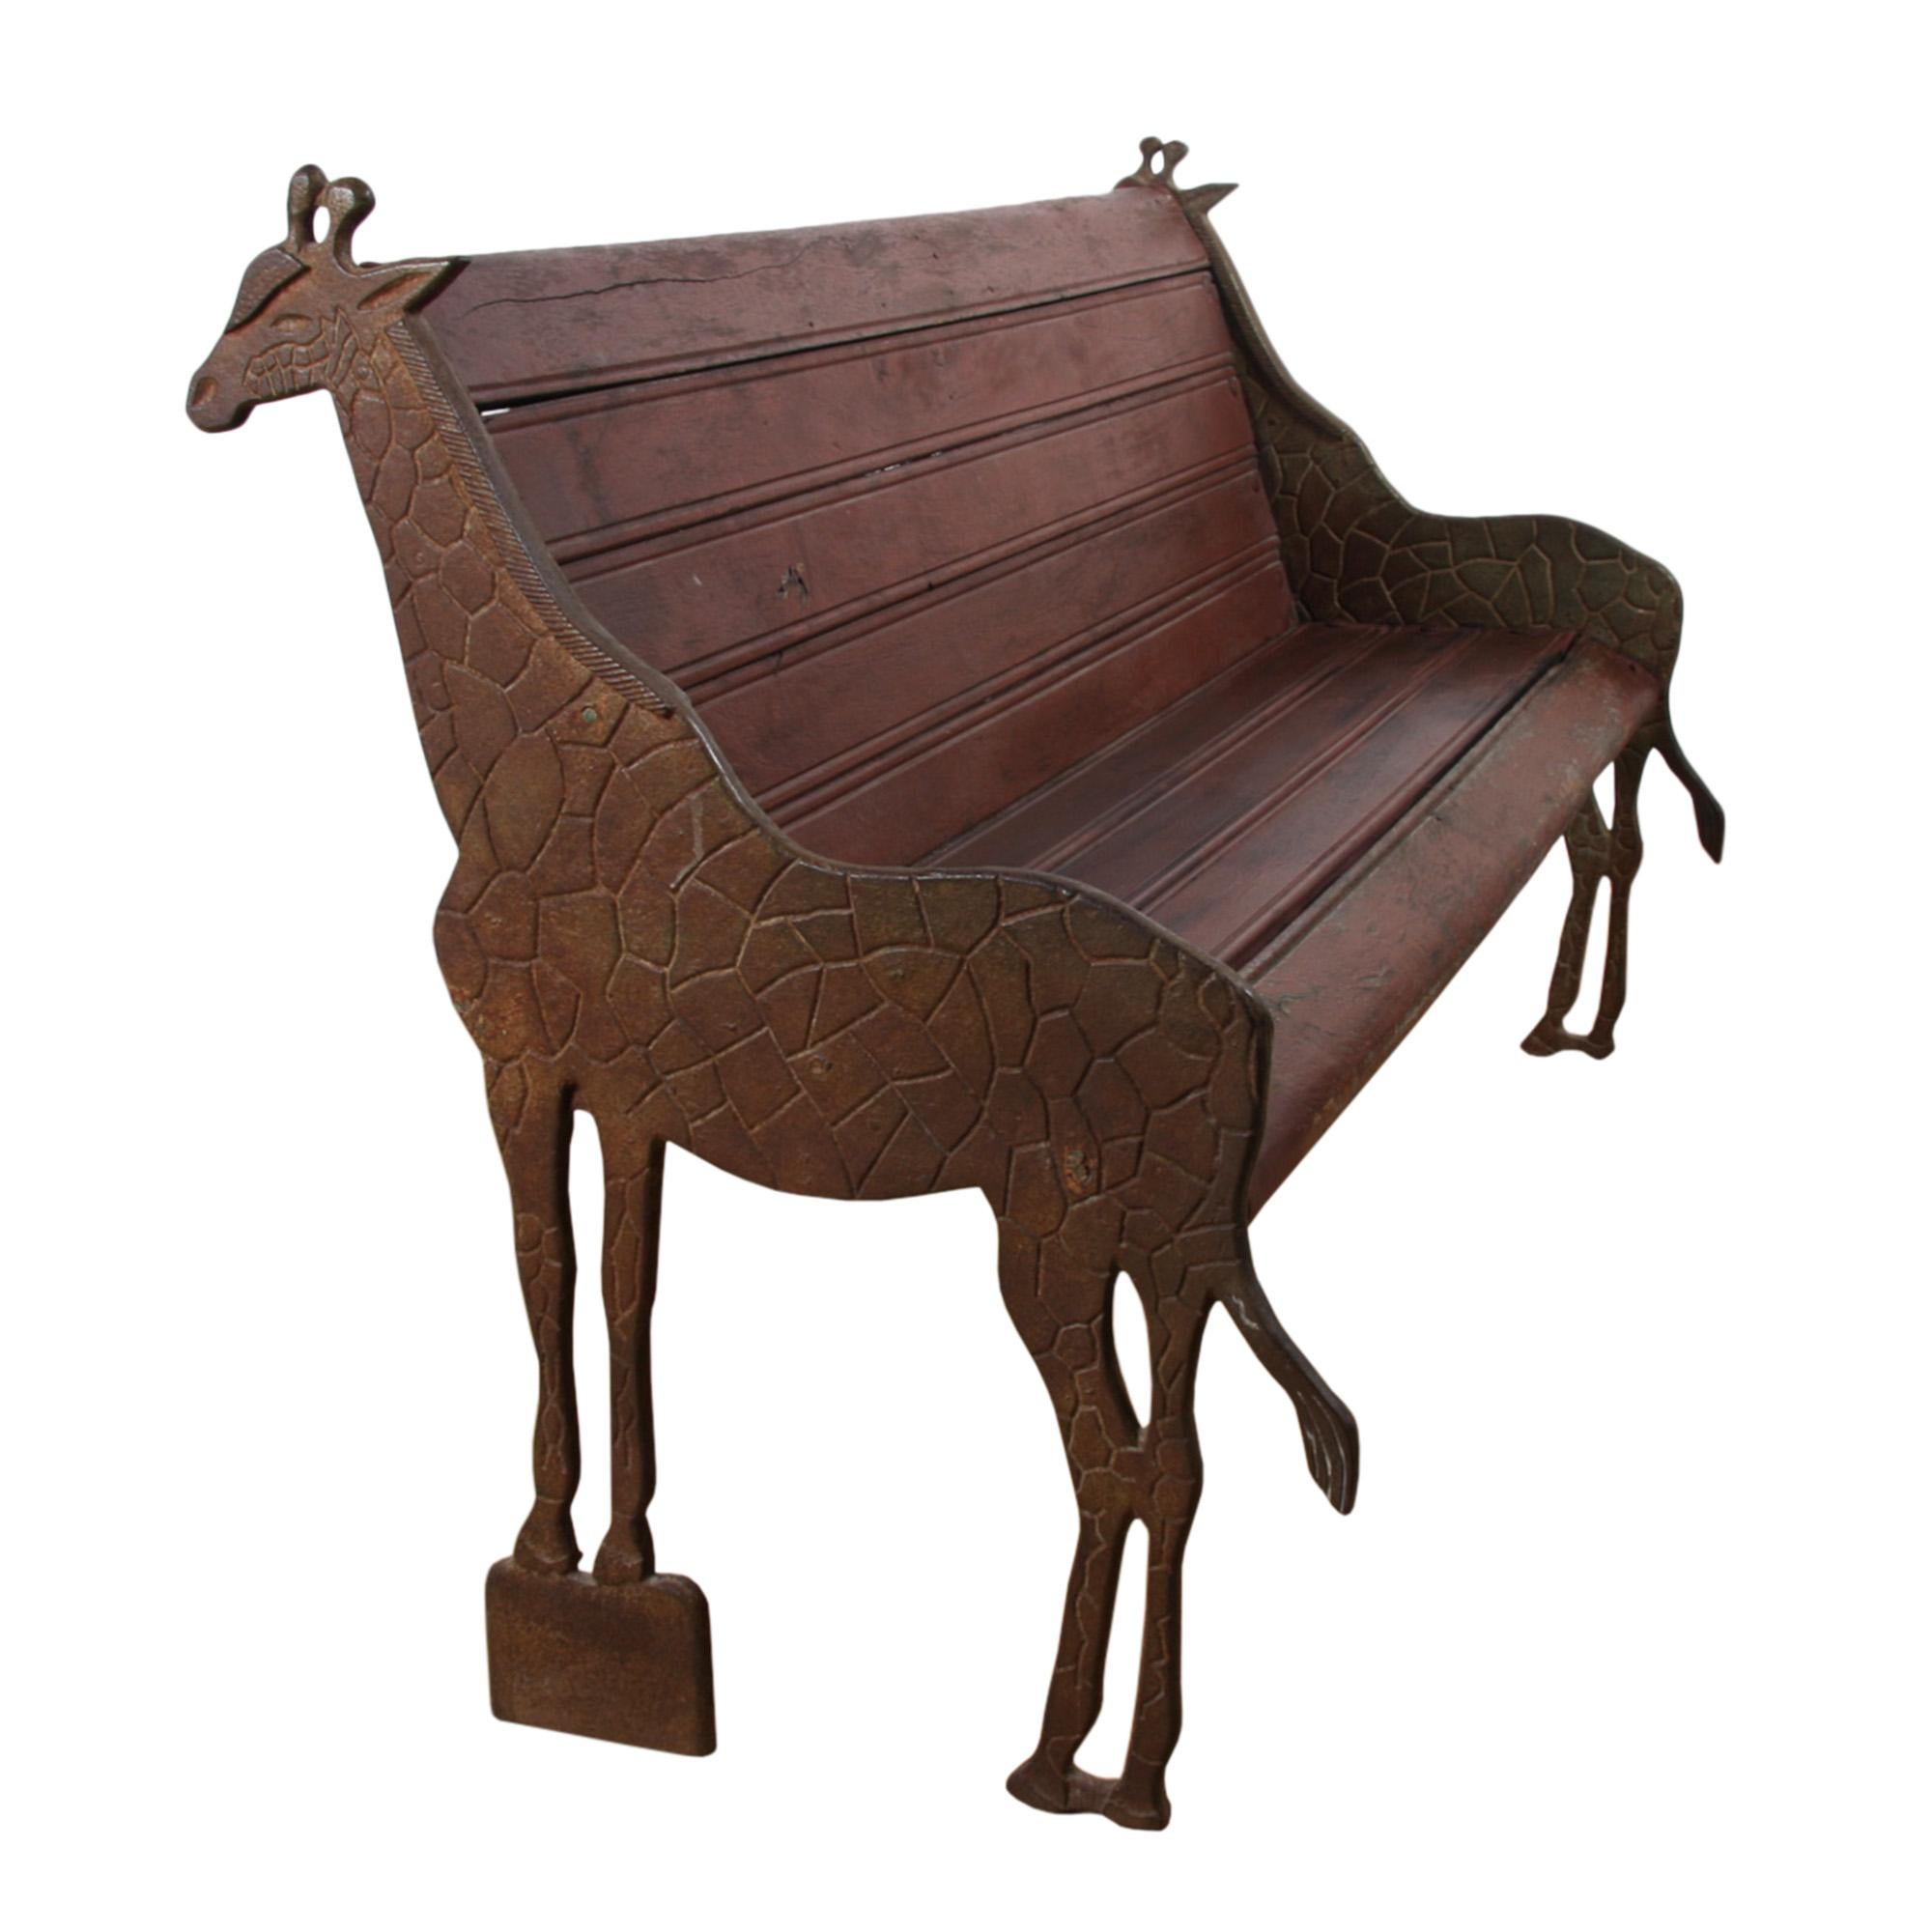 Rustic Giraffe Bench, Made for Colchester Zoo, England 1950s For Sale